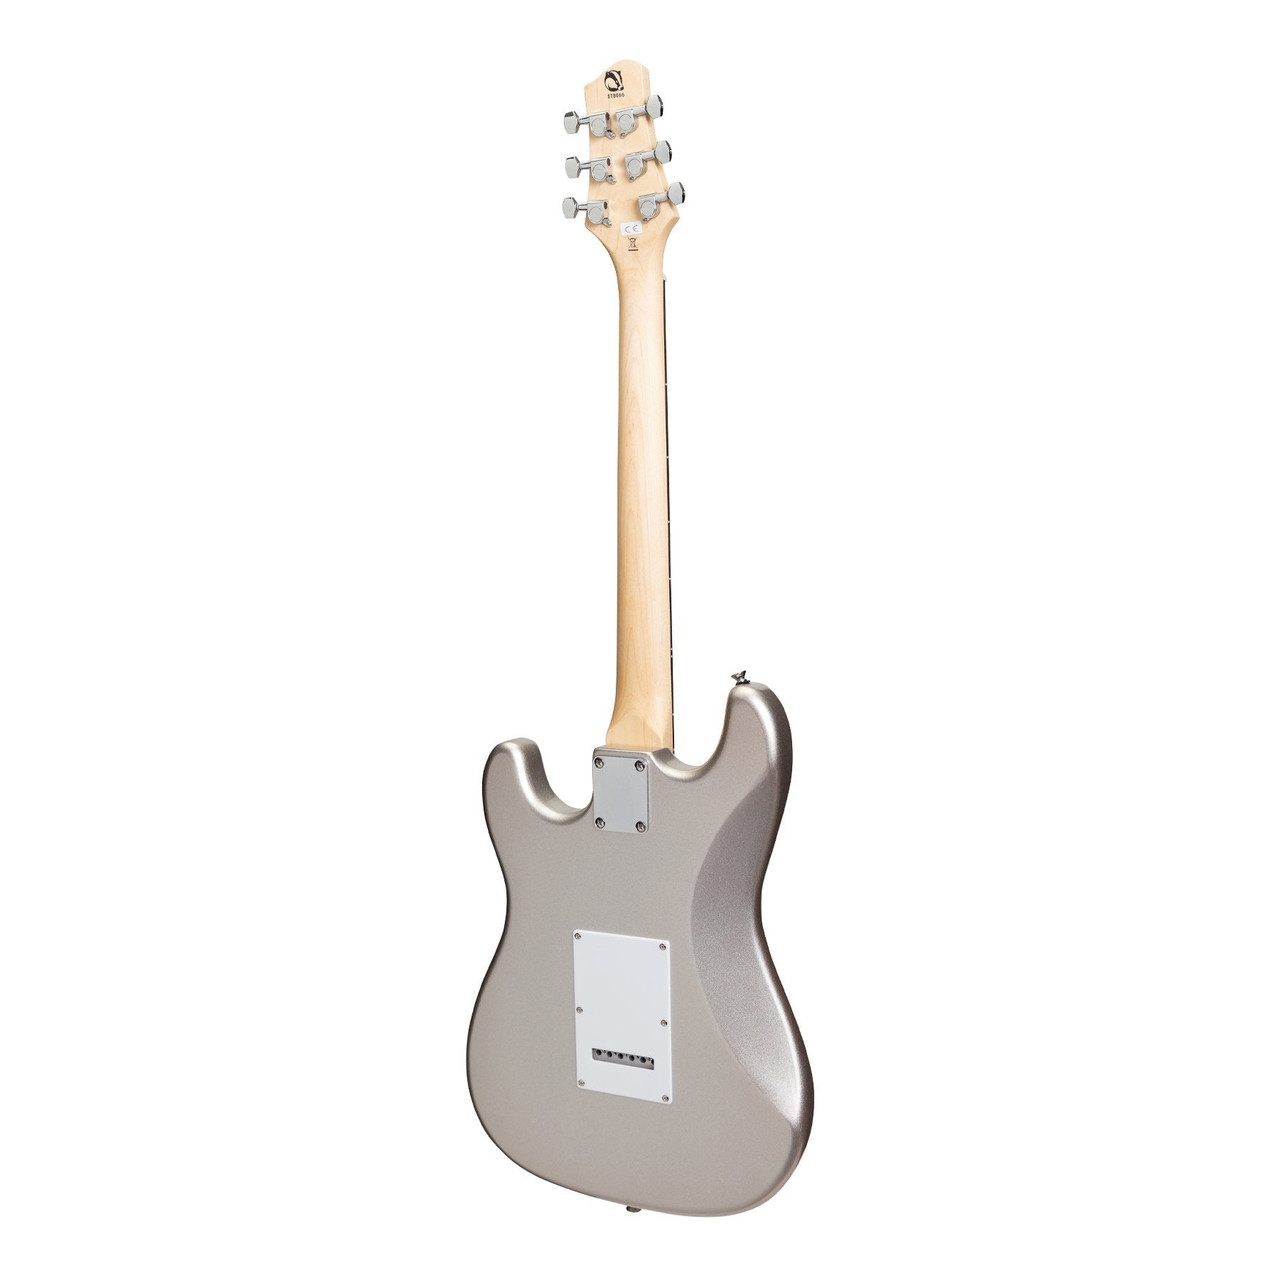 Badger Classic ST-Style Electric Guitar (Silver)